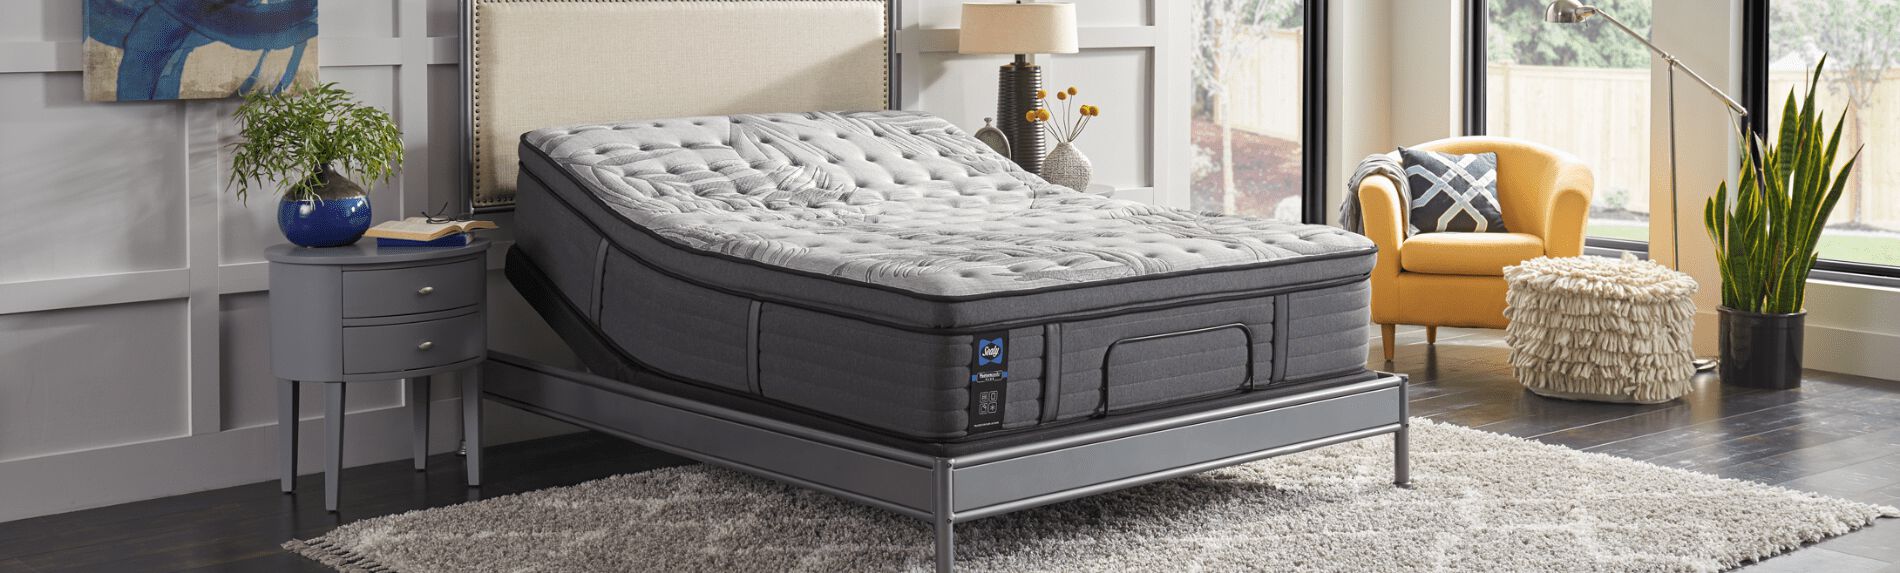 7 things about adjustable mattress sets you should know!